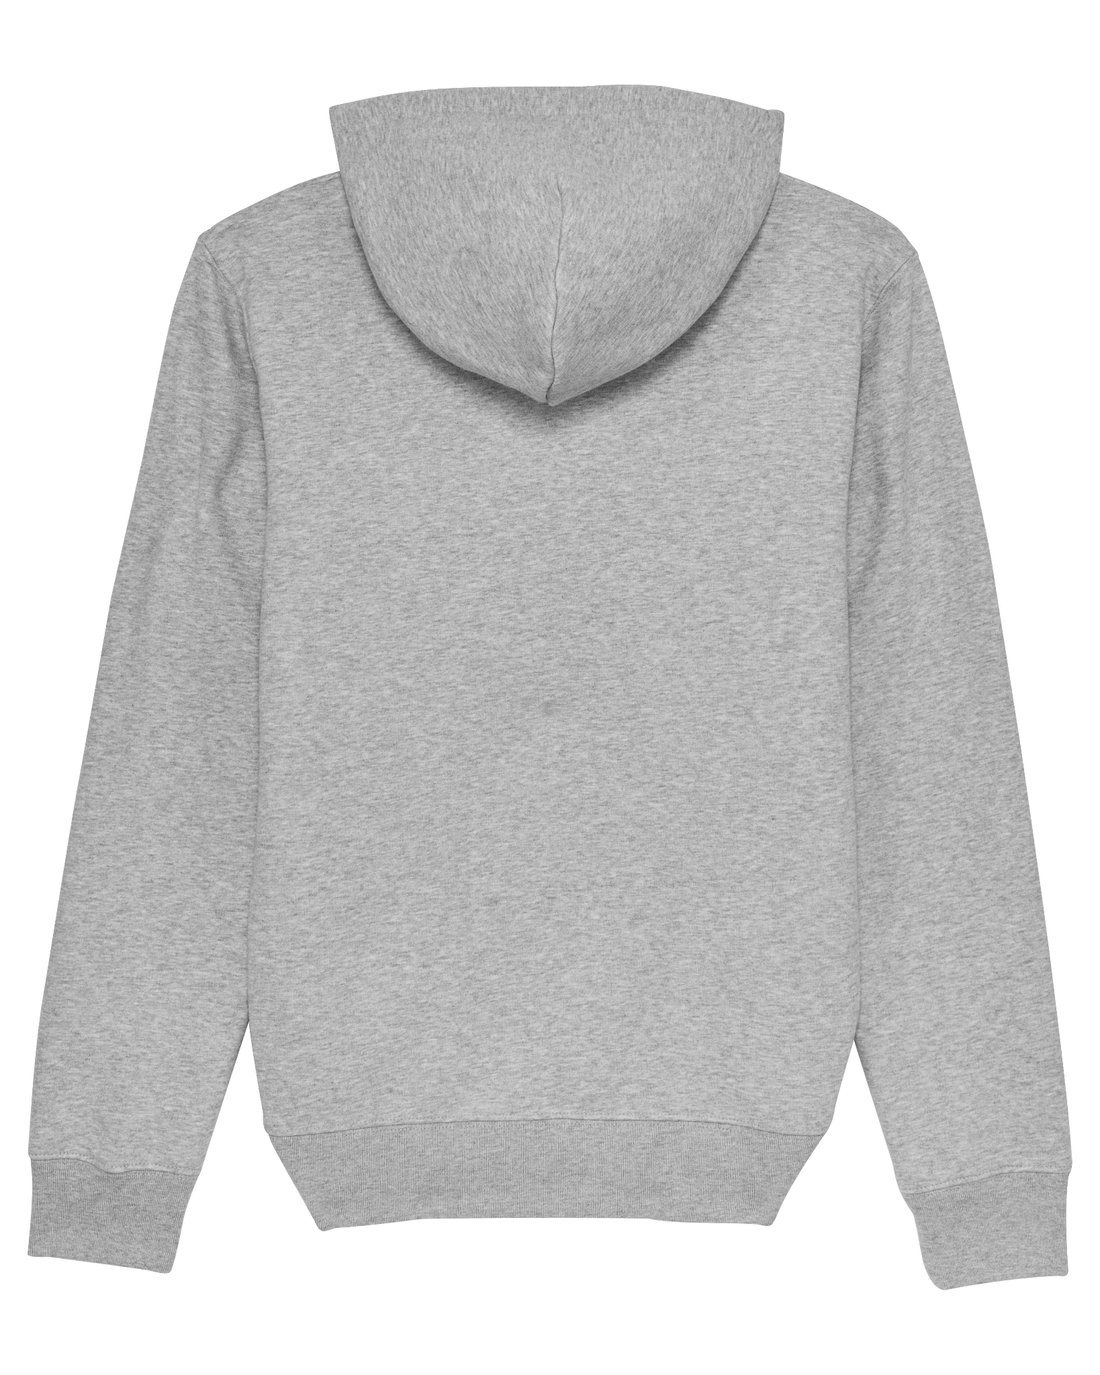 Grey Skater Hoodie, The Supply Network Back Print